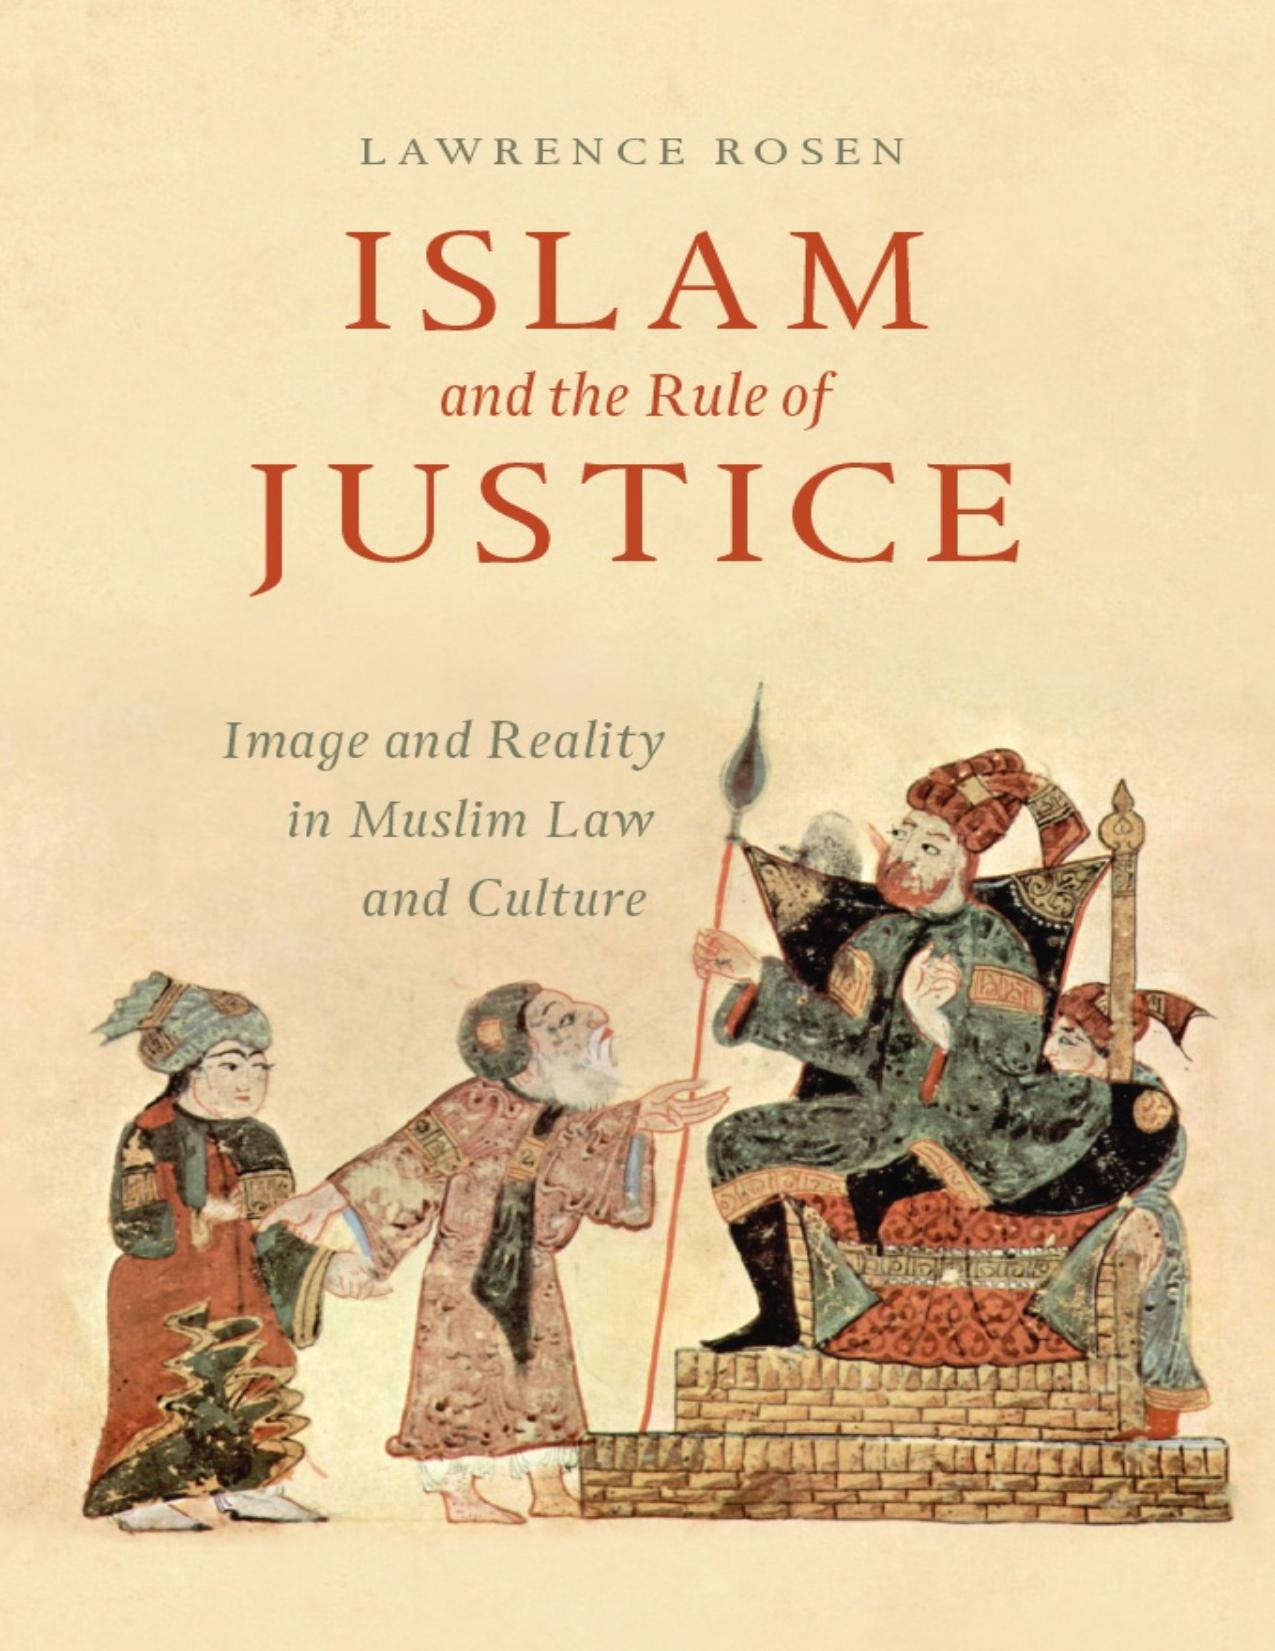 Islam and the Rule of Justice: Image and Reality in Muslim Law and Culture - PDFDrive.com